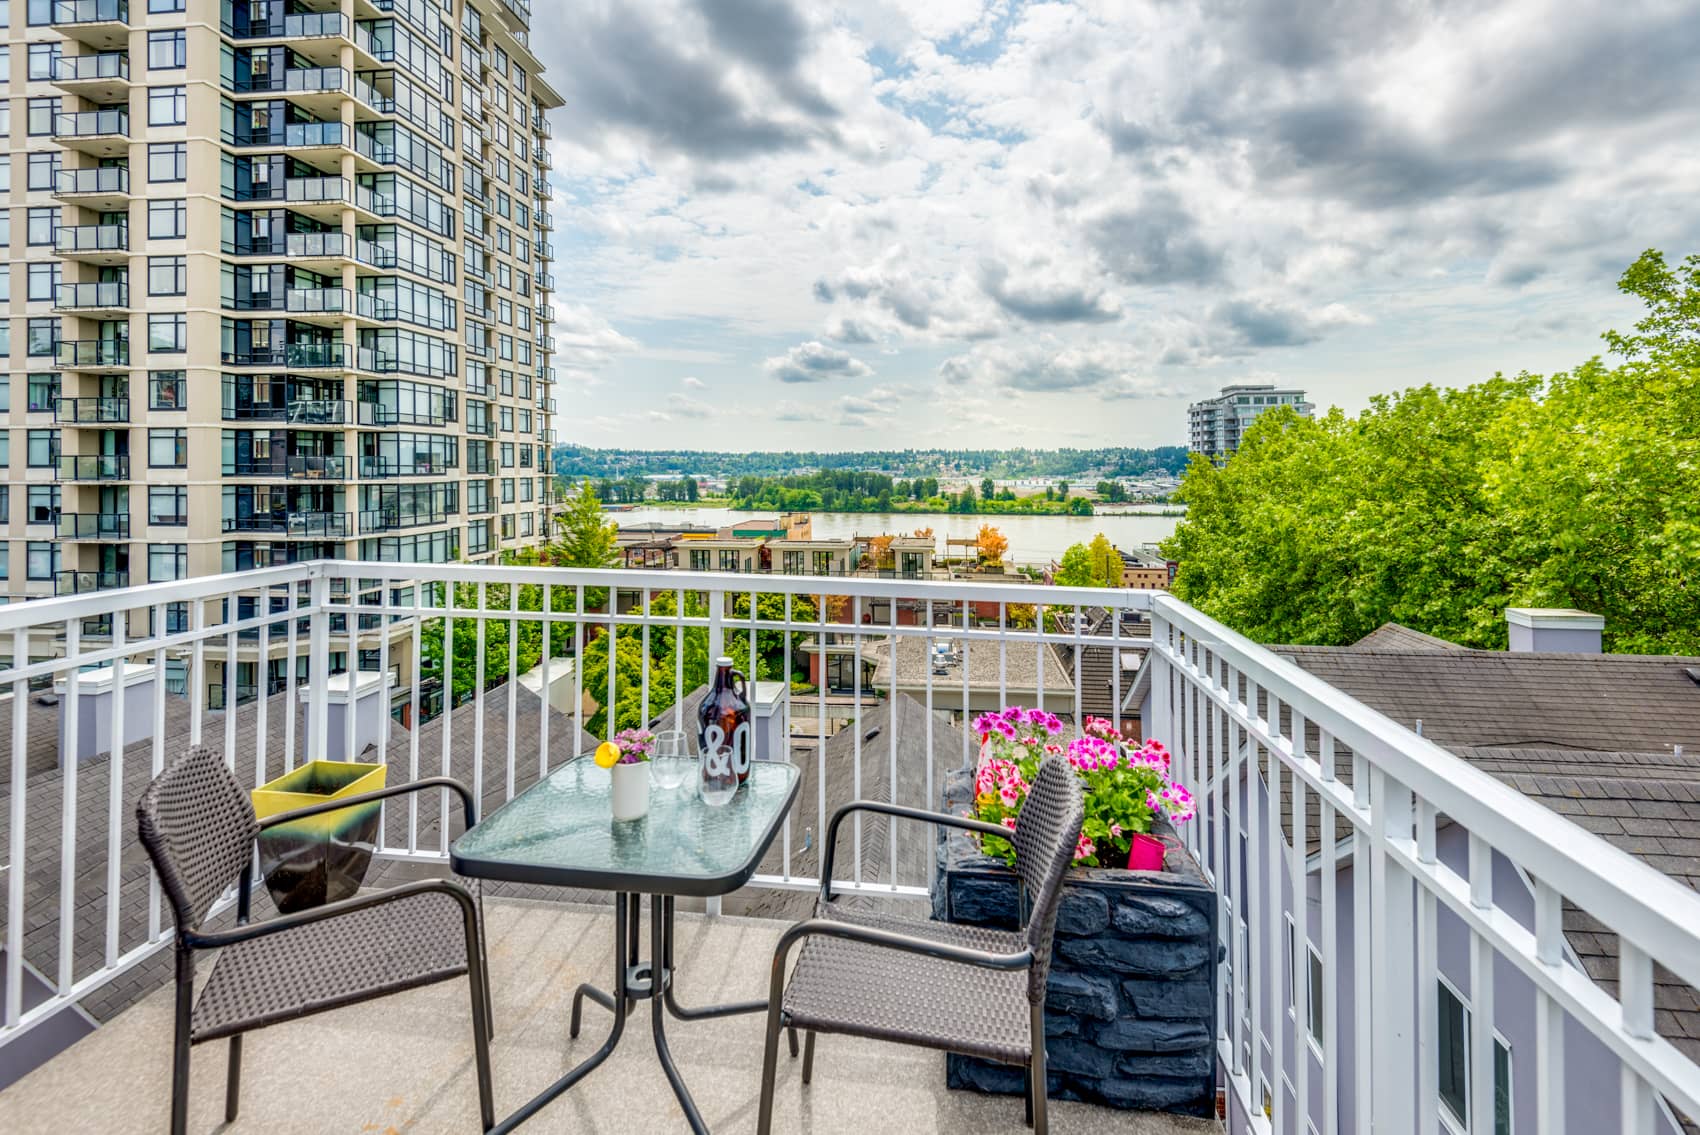 2 BEDROOM PENTHOUSE IN NEW WESTMINSTER